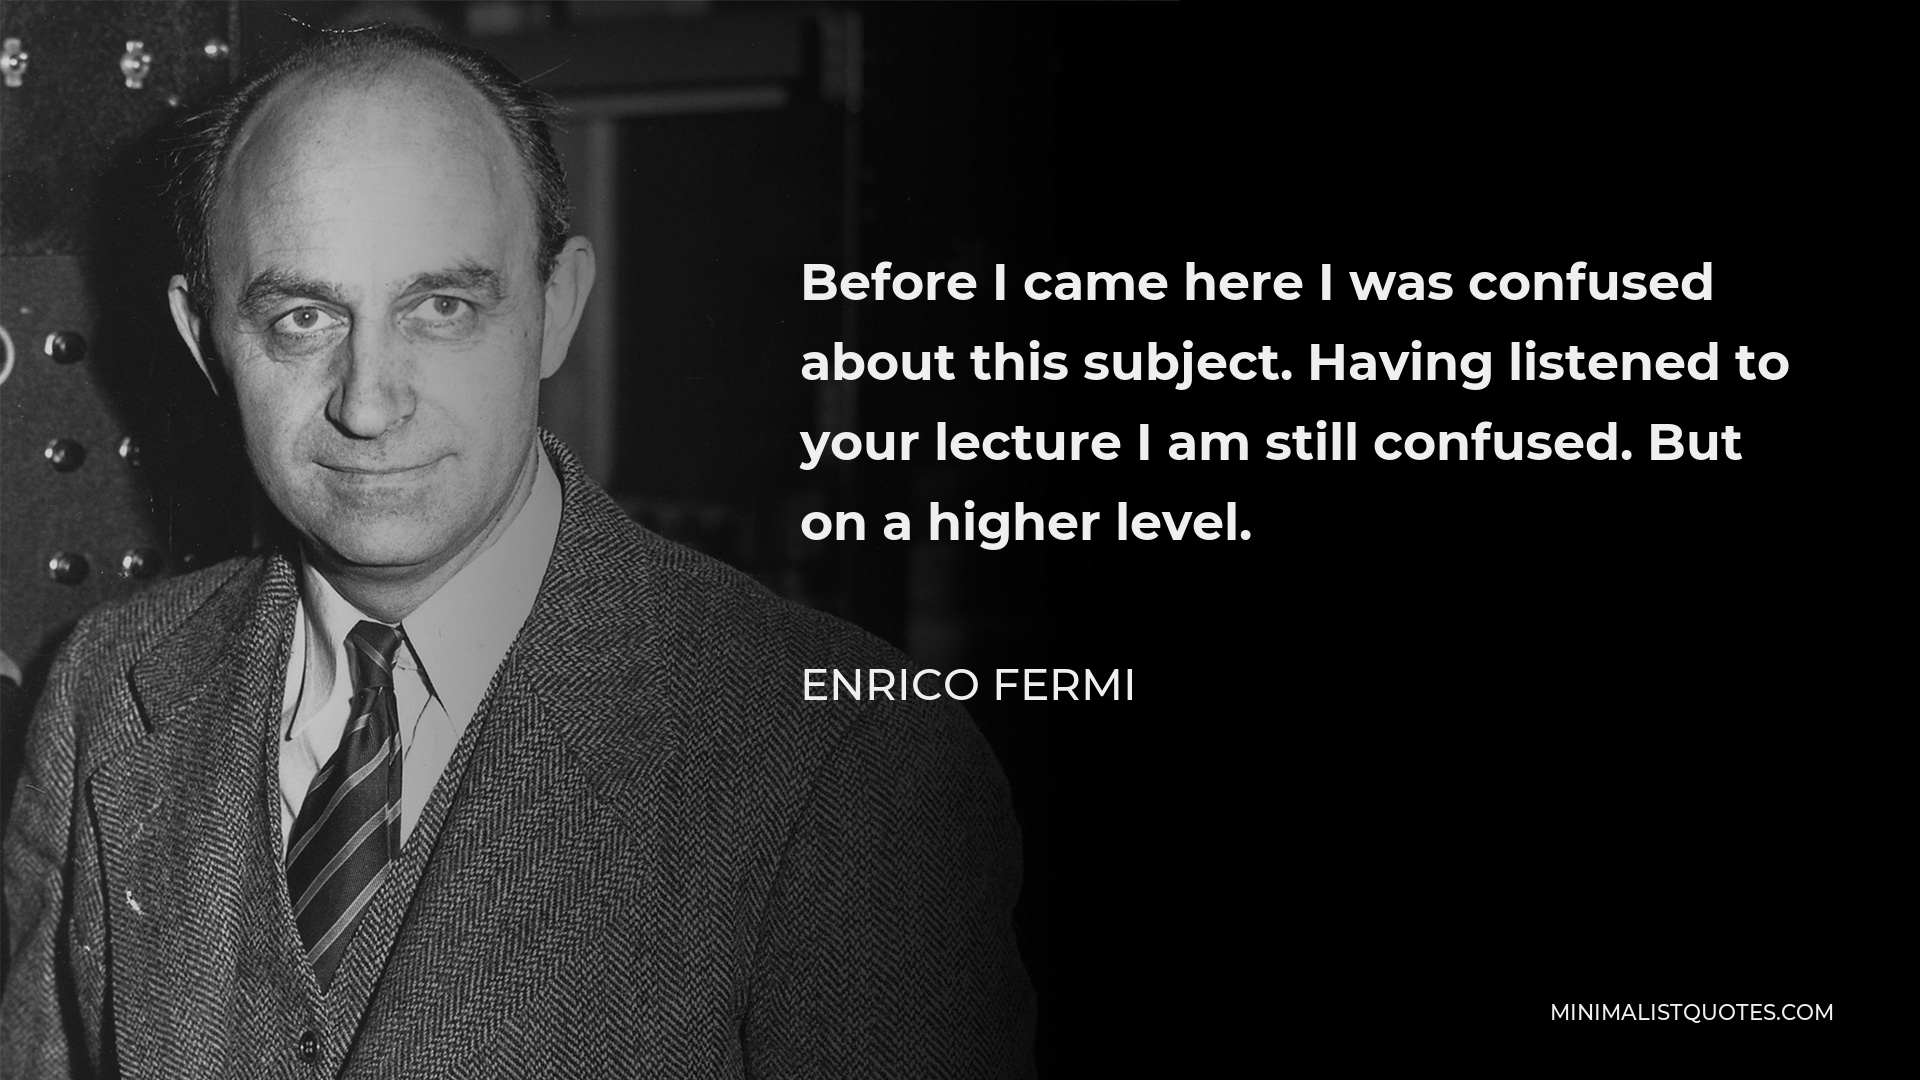 Enrico Fermi Quote - Before I came here I was confused about this subject. Having listened to your lecture I am still confused. But on a higher level.